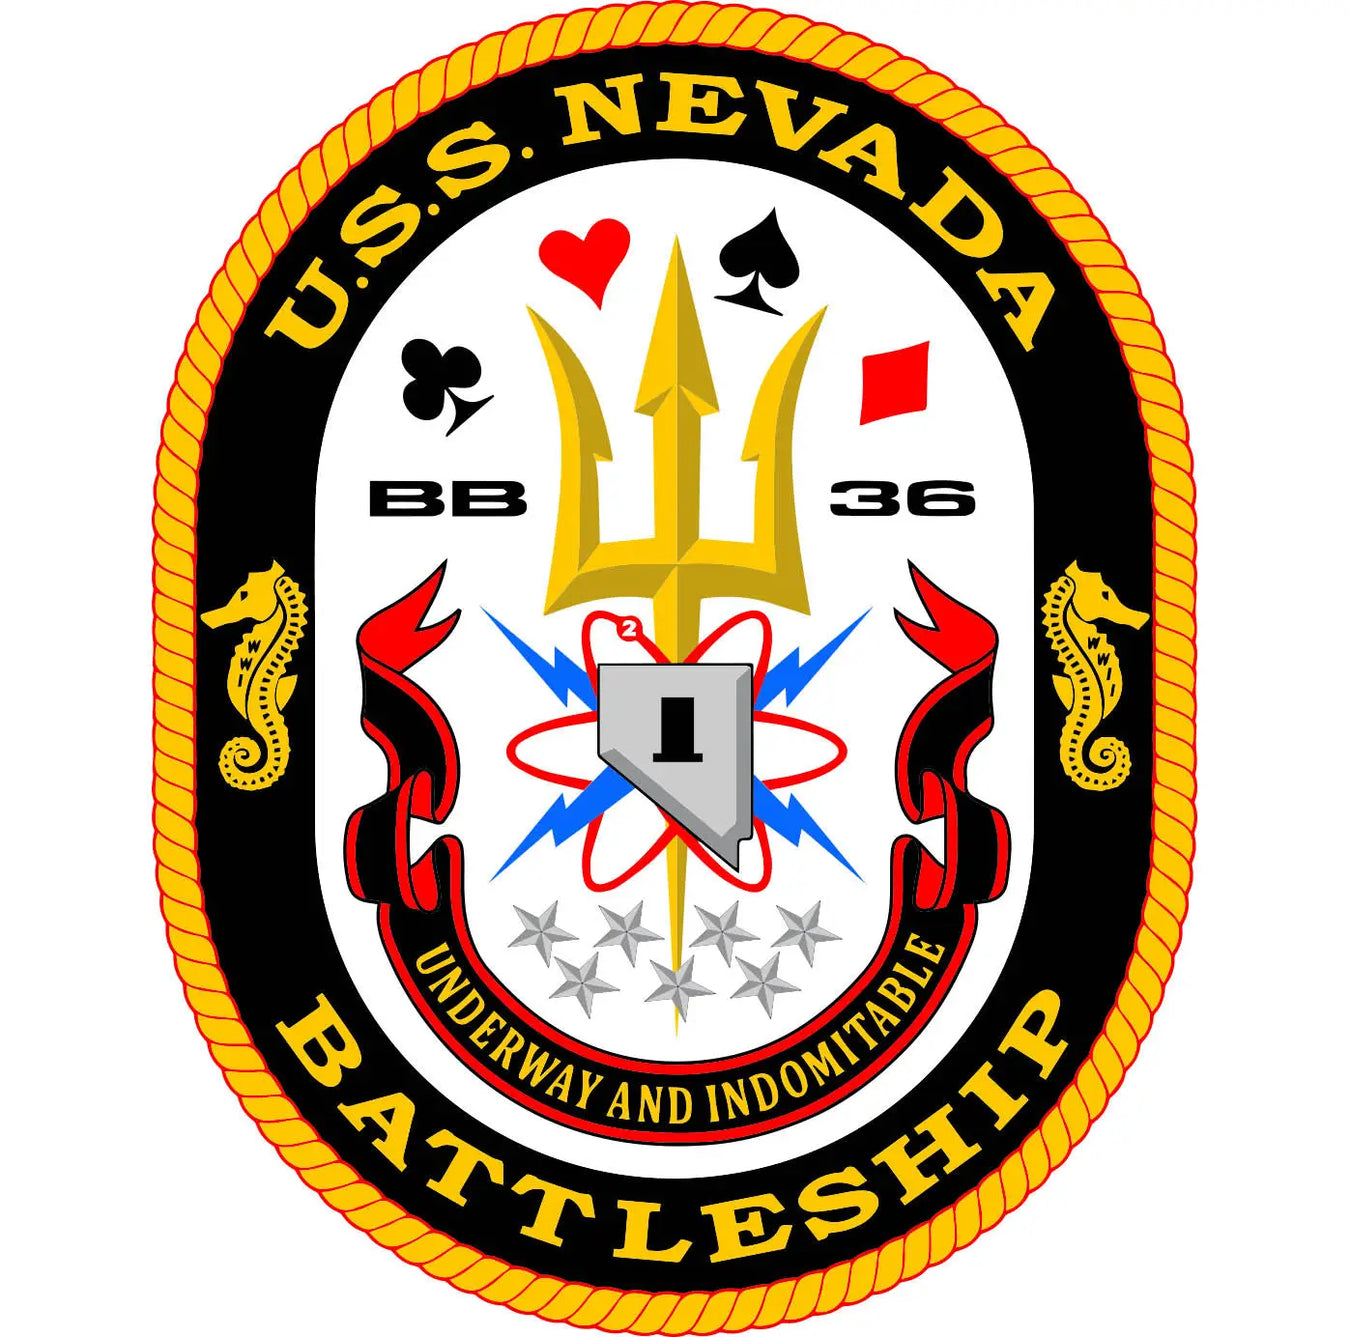 USS Nevada (BB-36) Merchandise - Shop T-Shirts, hoodies, patches, pins, flags, decals, hats and more.